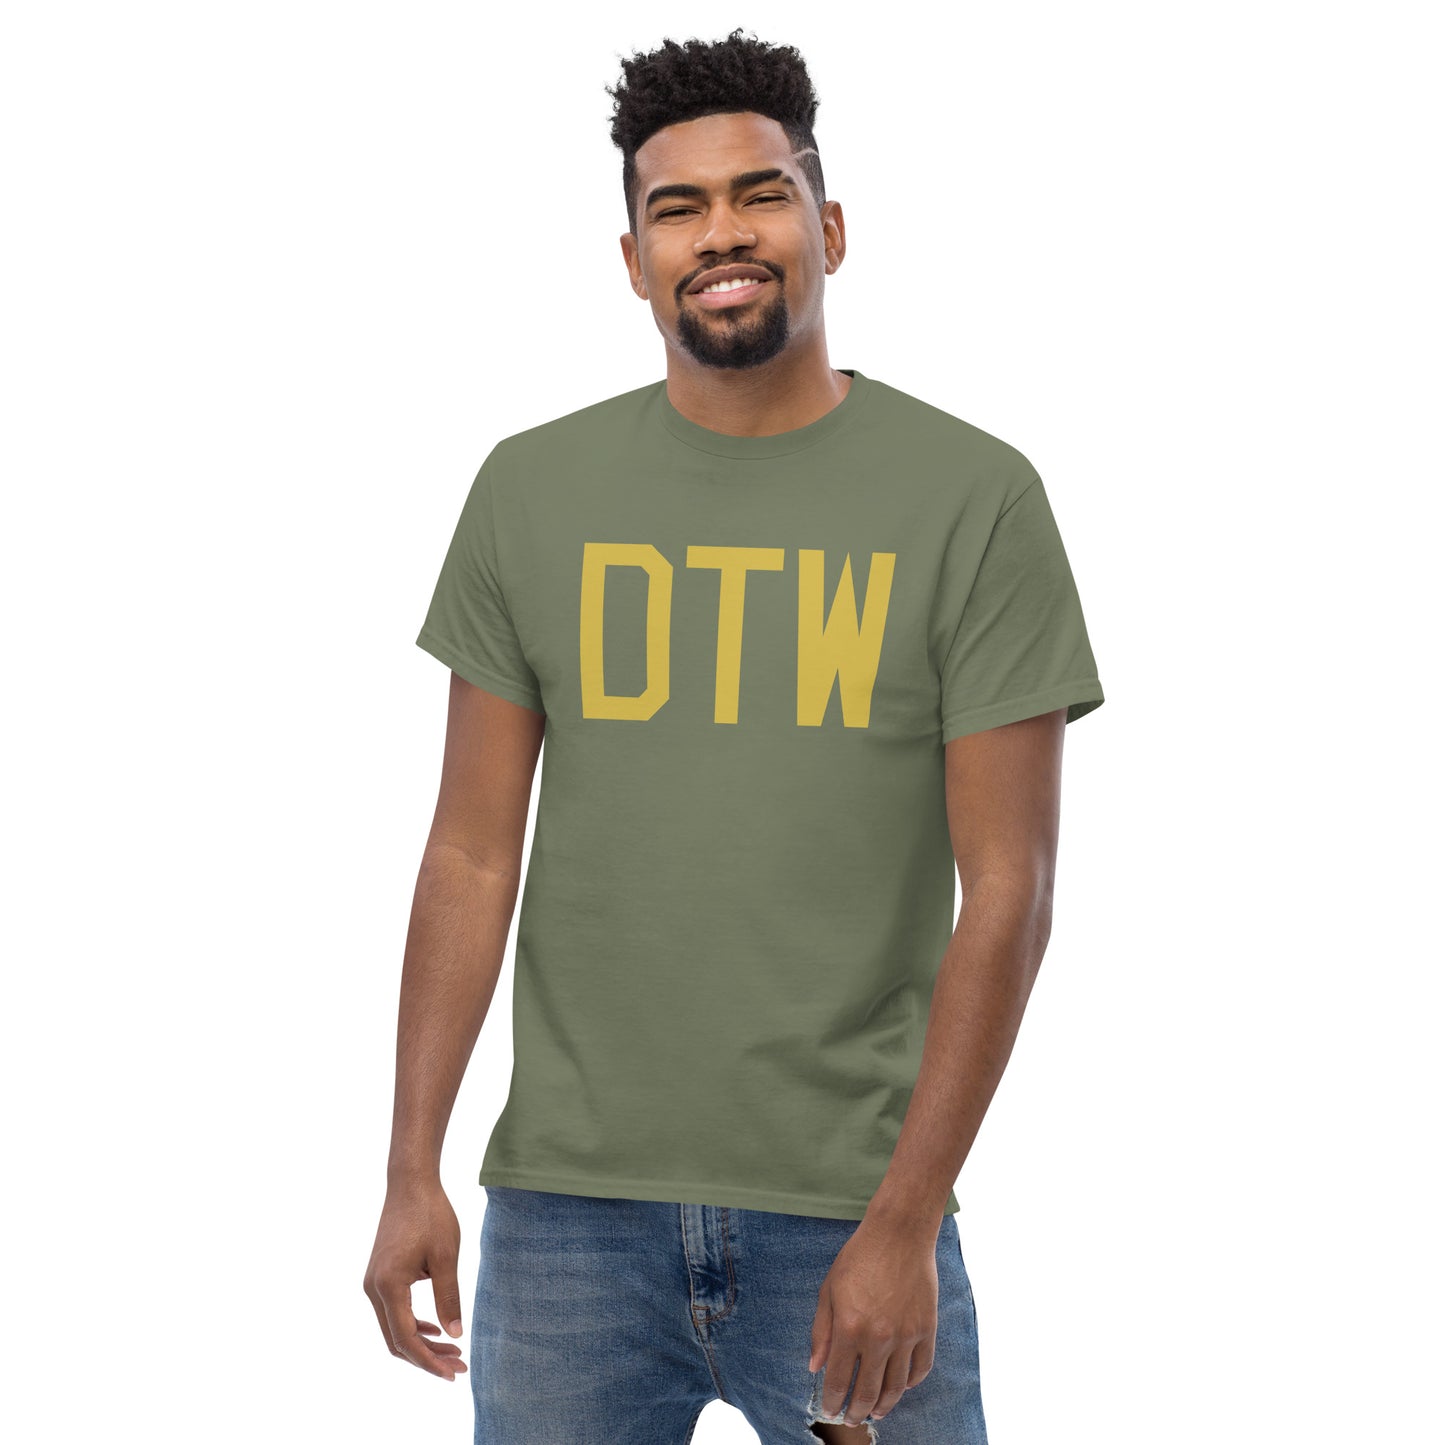 Aviation Enthusiast Men's Tee - Old Gold Graphic • DTW Detroit • YHM Designs - Image 06